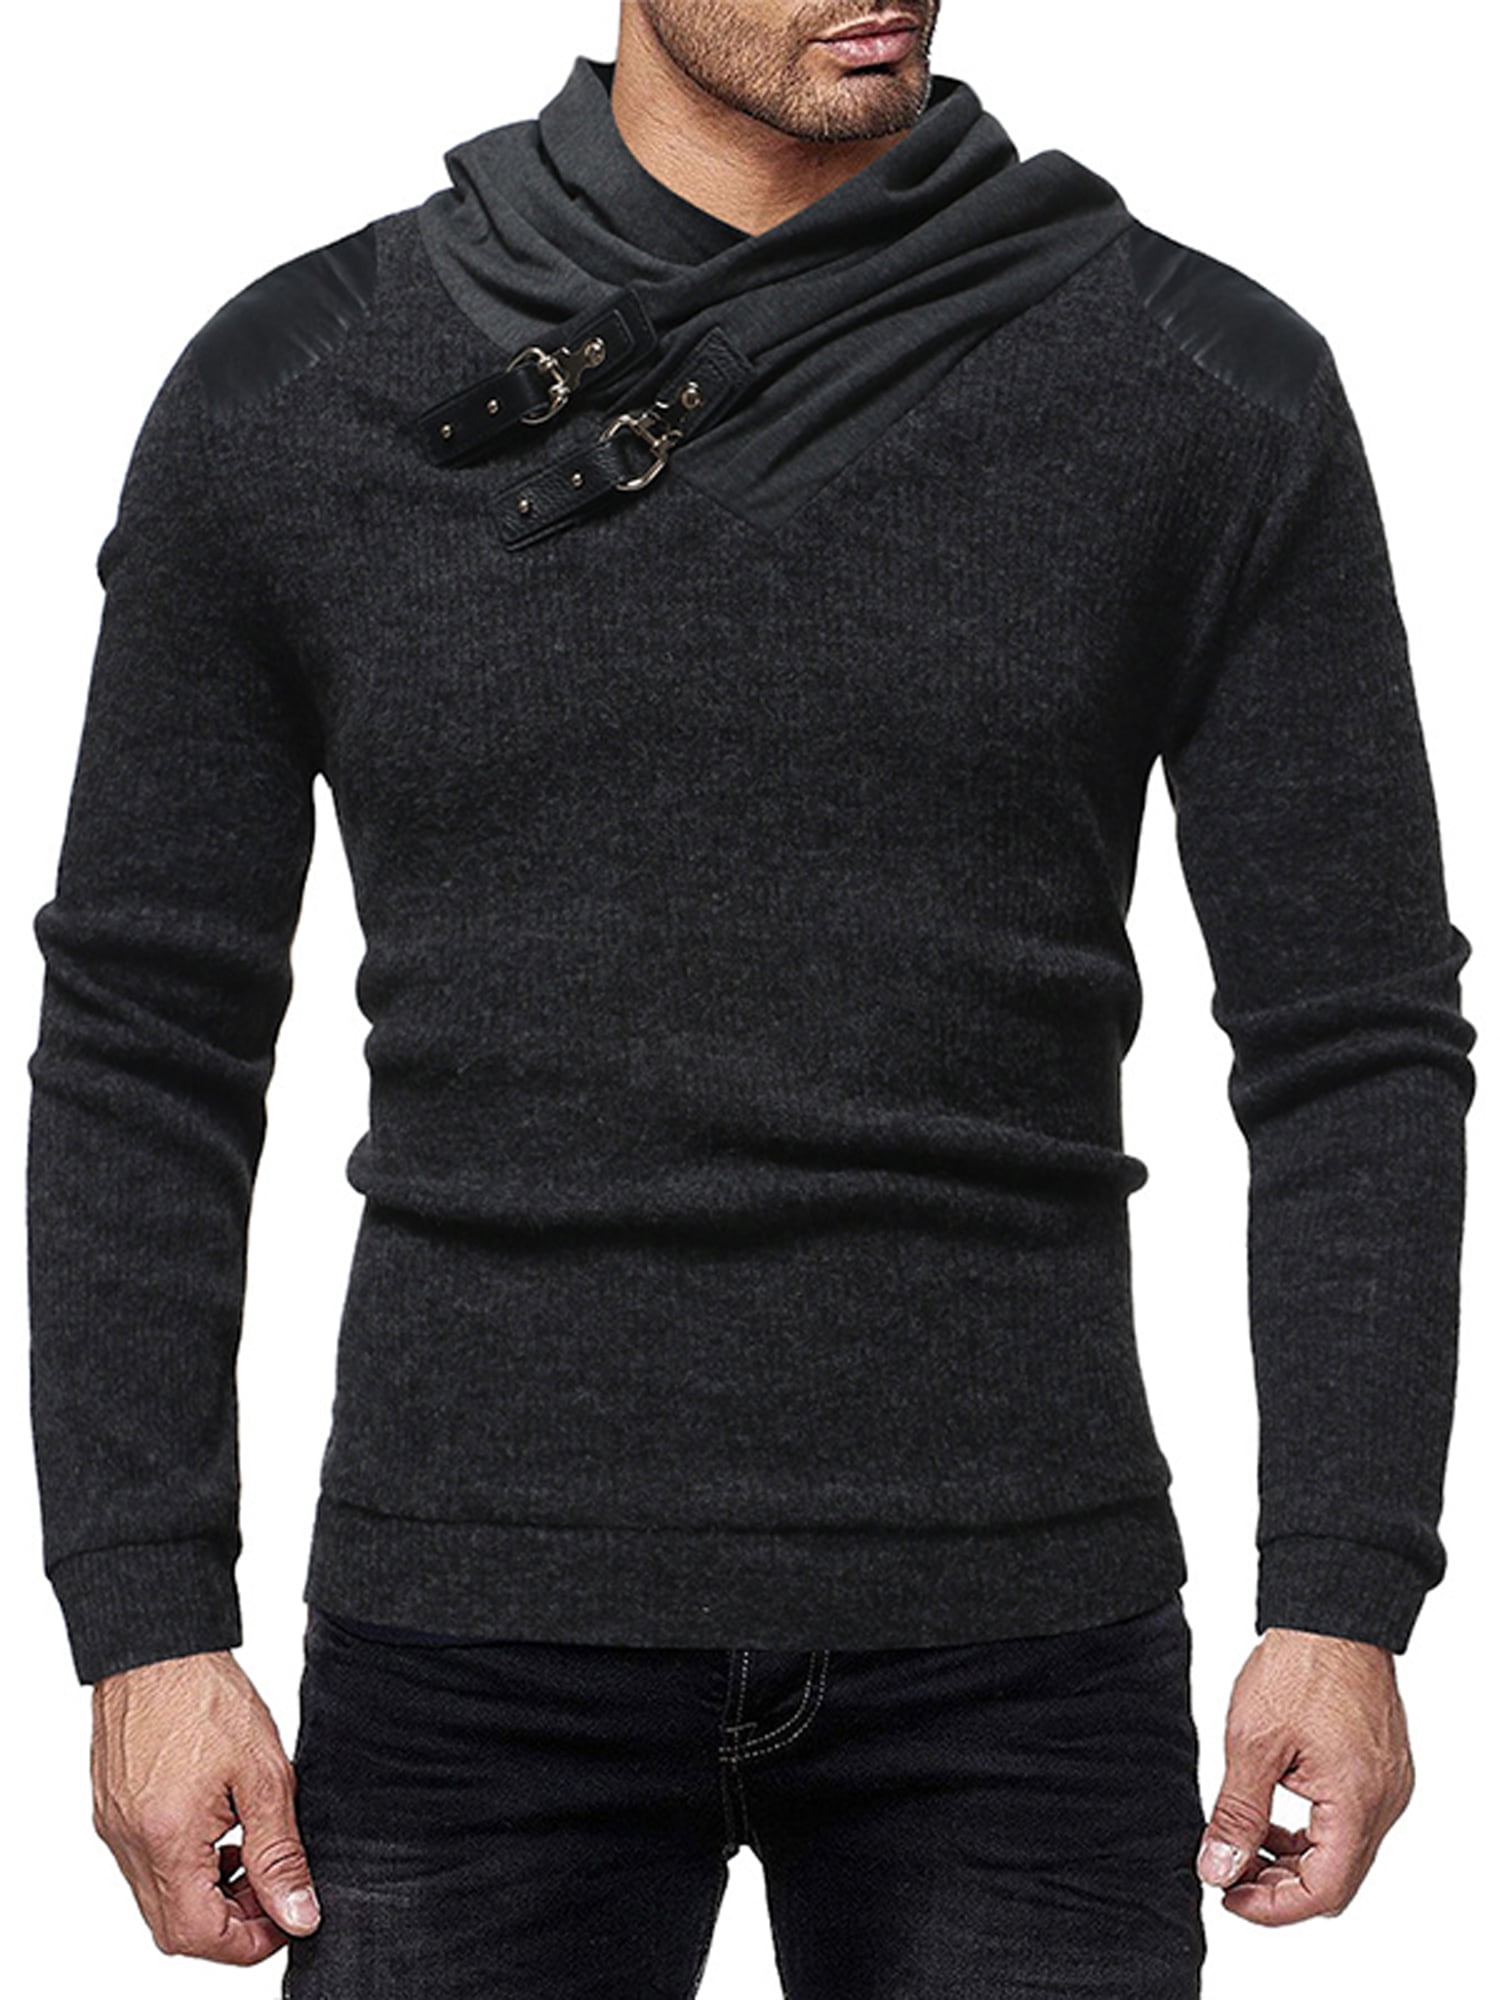 Wodstyle - Men's Knit Cowl Neck Leather Buckle Pullover Long Sleeve ...